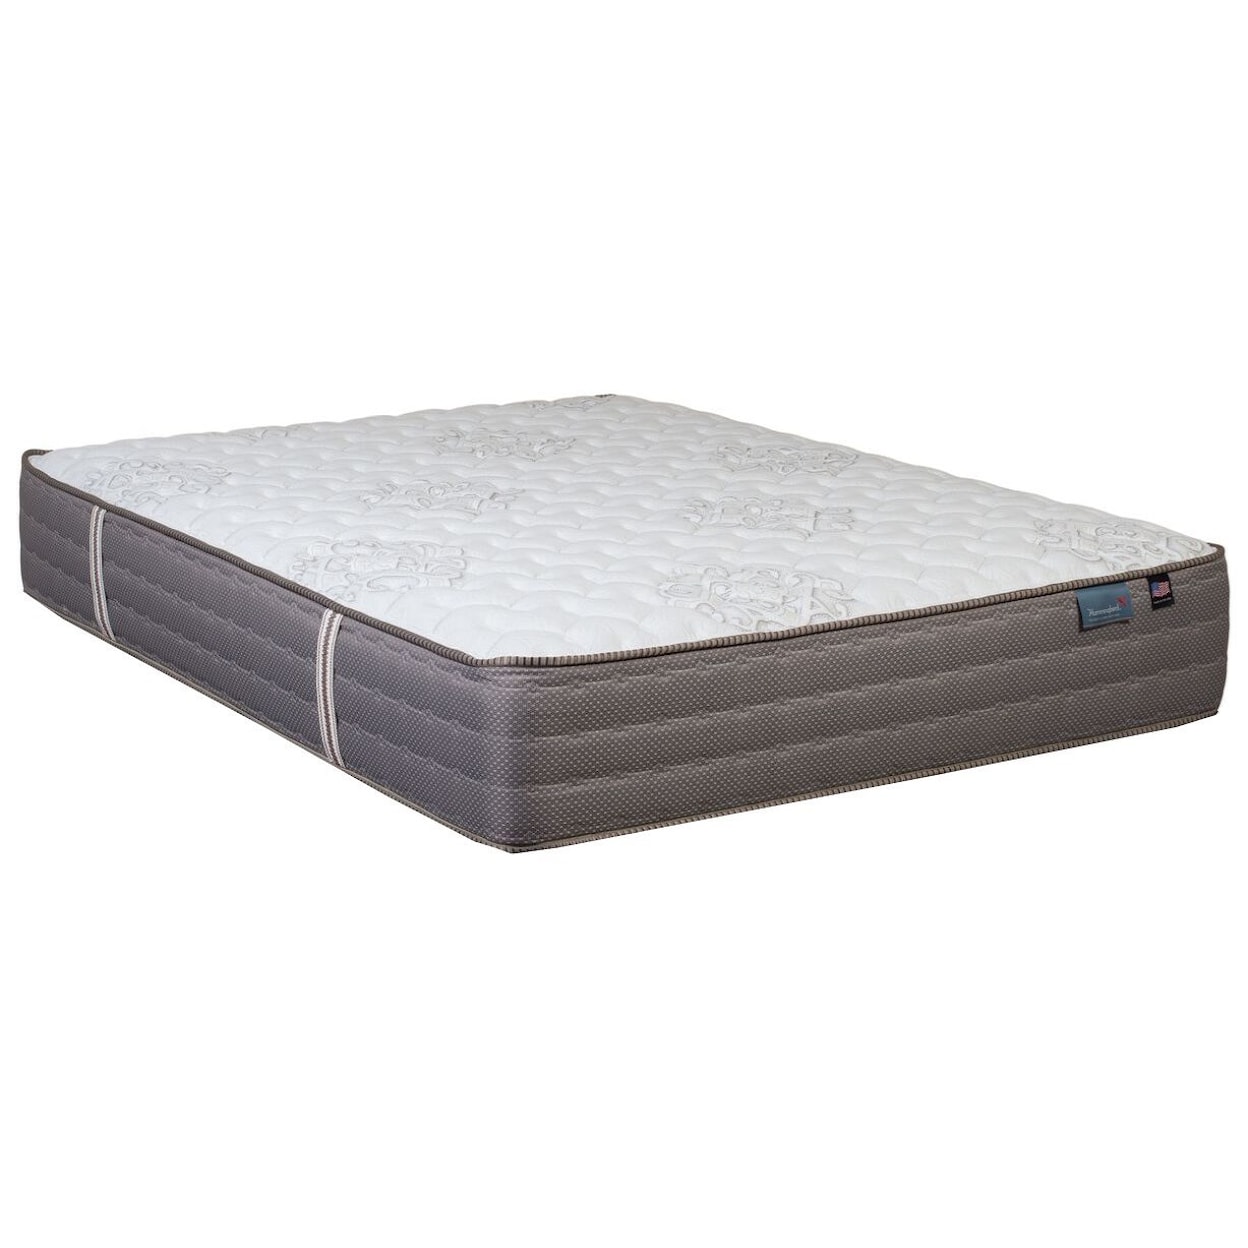 Therapedic Mystic Cloud Firm Queen Firm Pocketed Coil Mattress